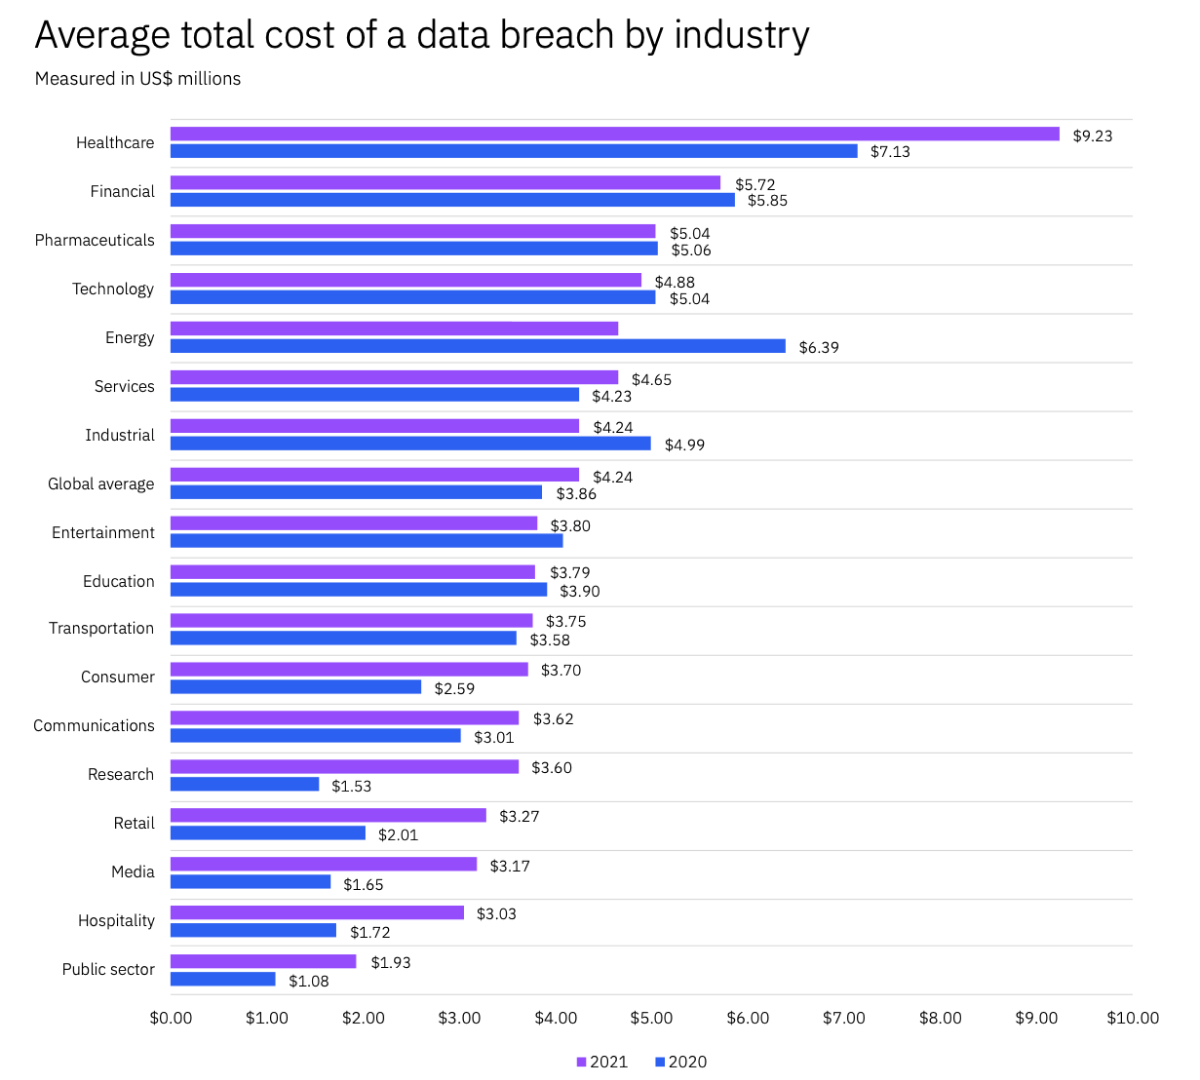 Average total cost of a data breach by industry - IBM report 2021